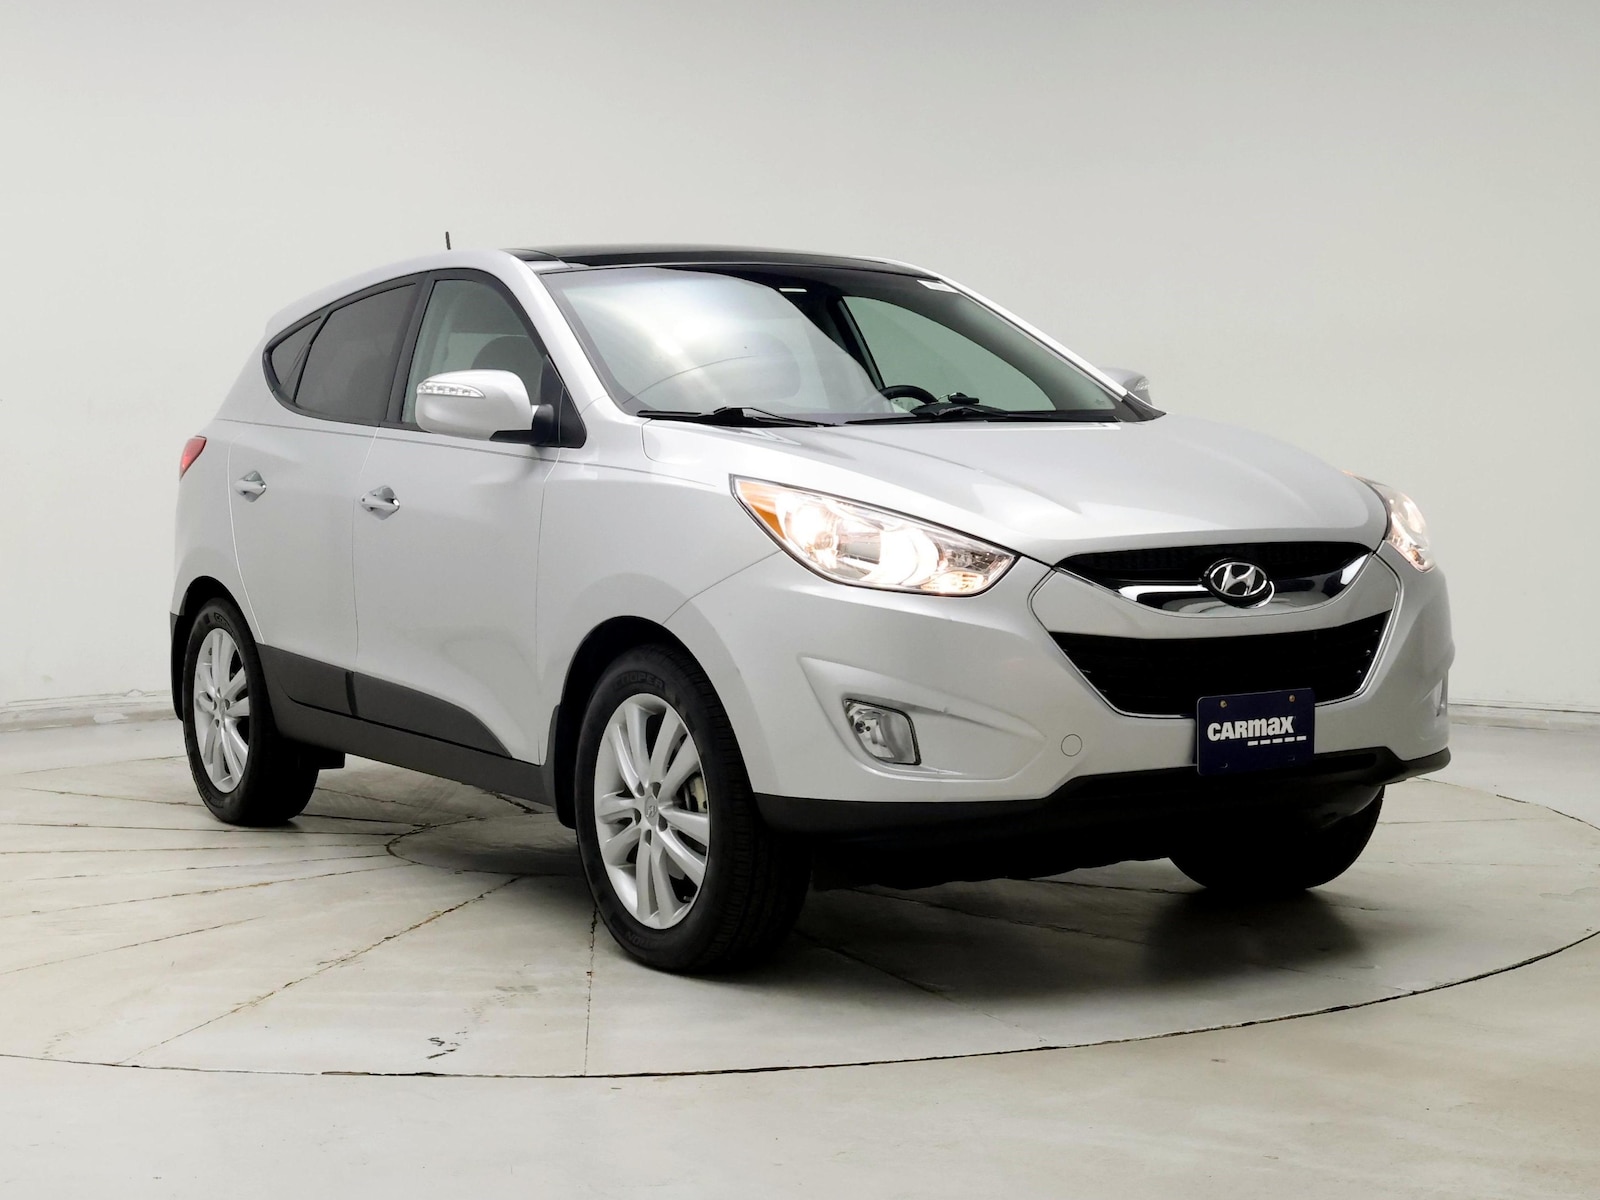 Used 2013 Hyundai Tucson Limited with VIN KM8JUCAC2DU580395 for sale in Kenosha, WI